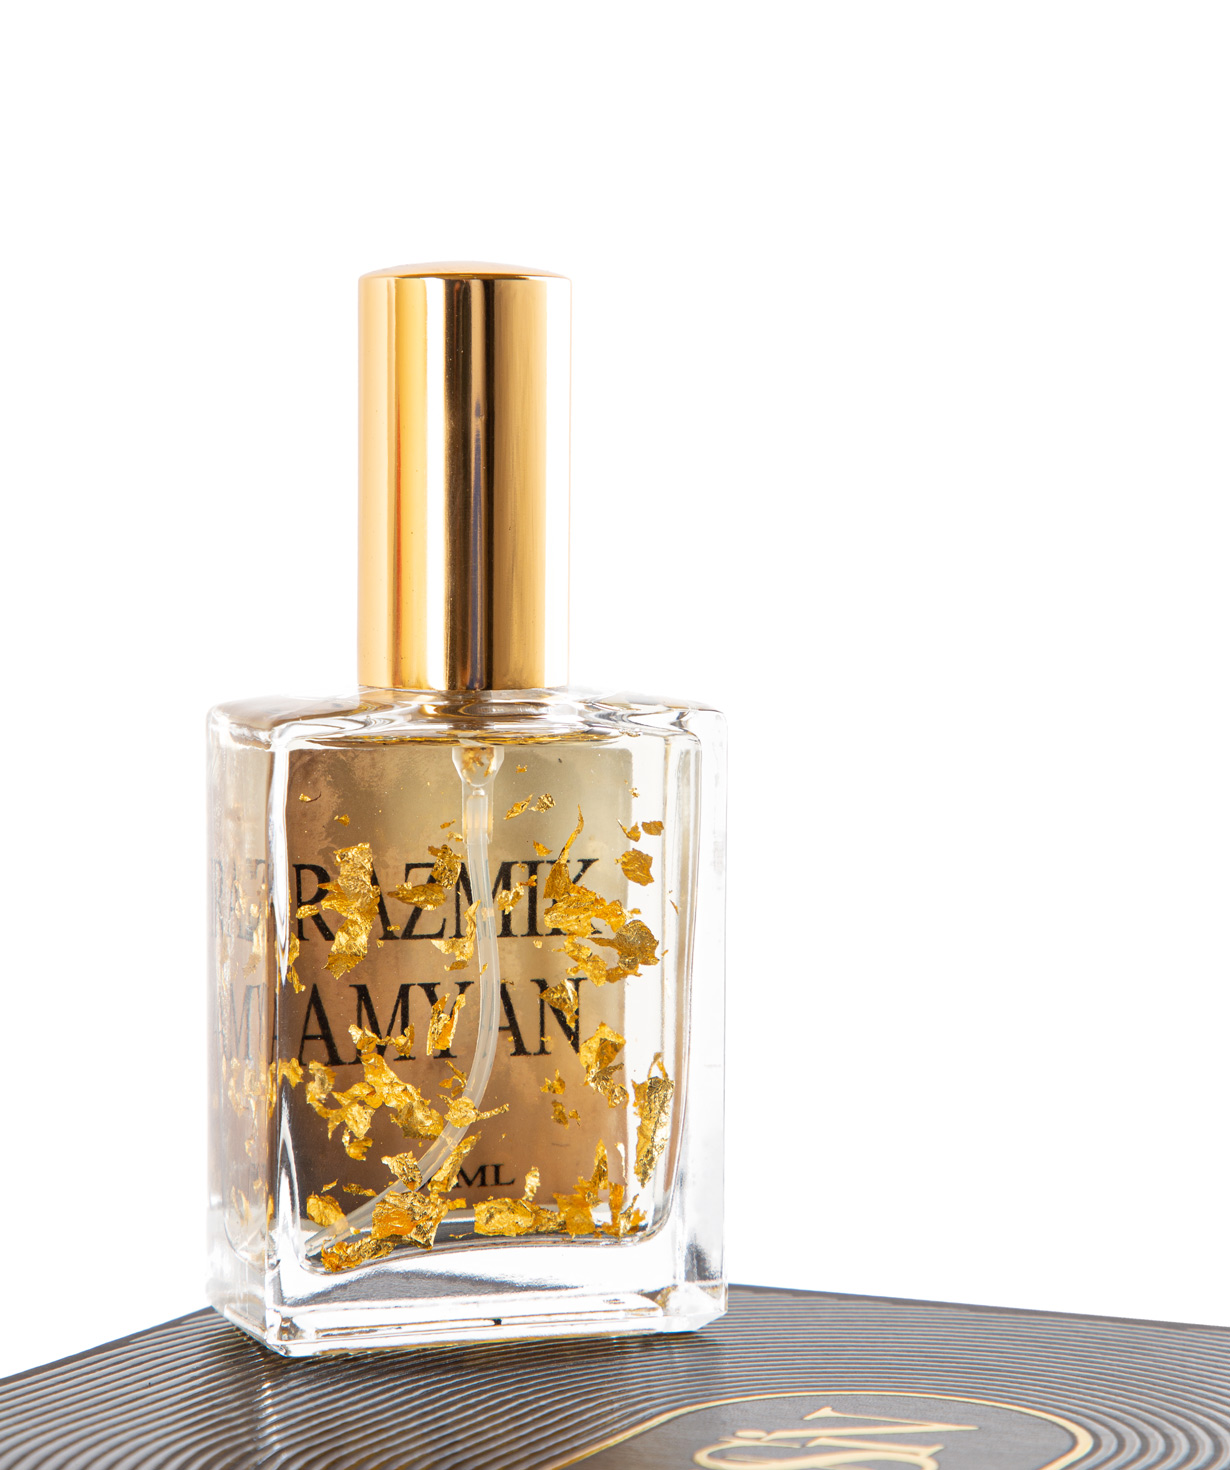 Perfume `Lusin parfume` with your name / surname